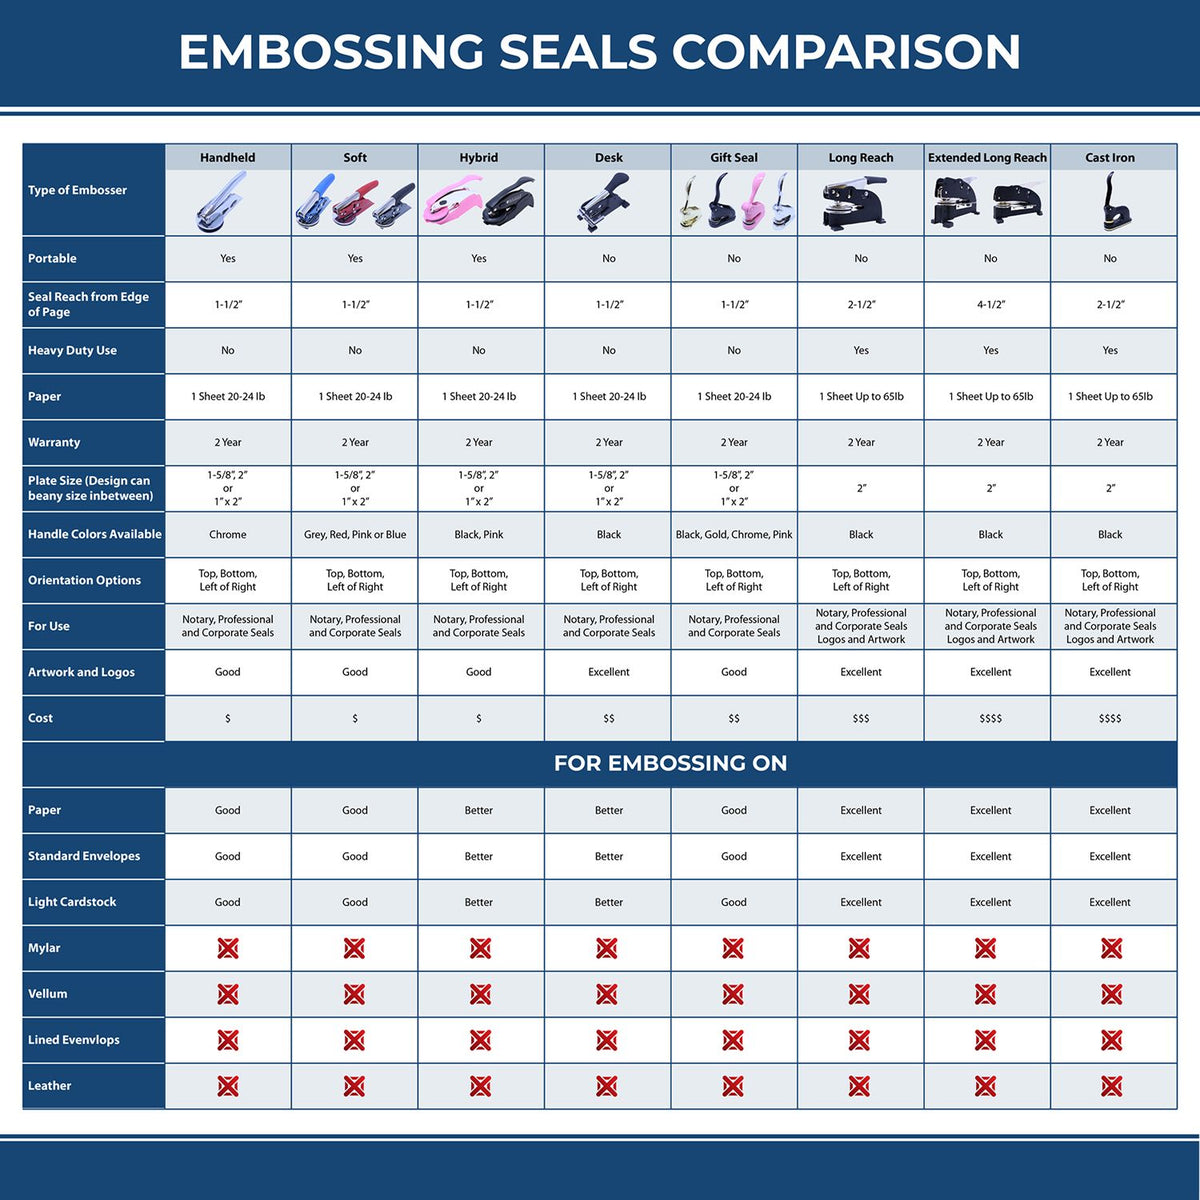 A comparison chart for the different types of mount models available for the Louisiana Desk Surveyor Seal Embosser.